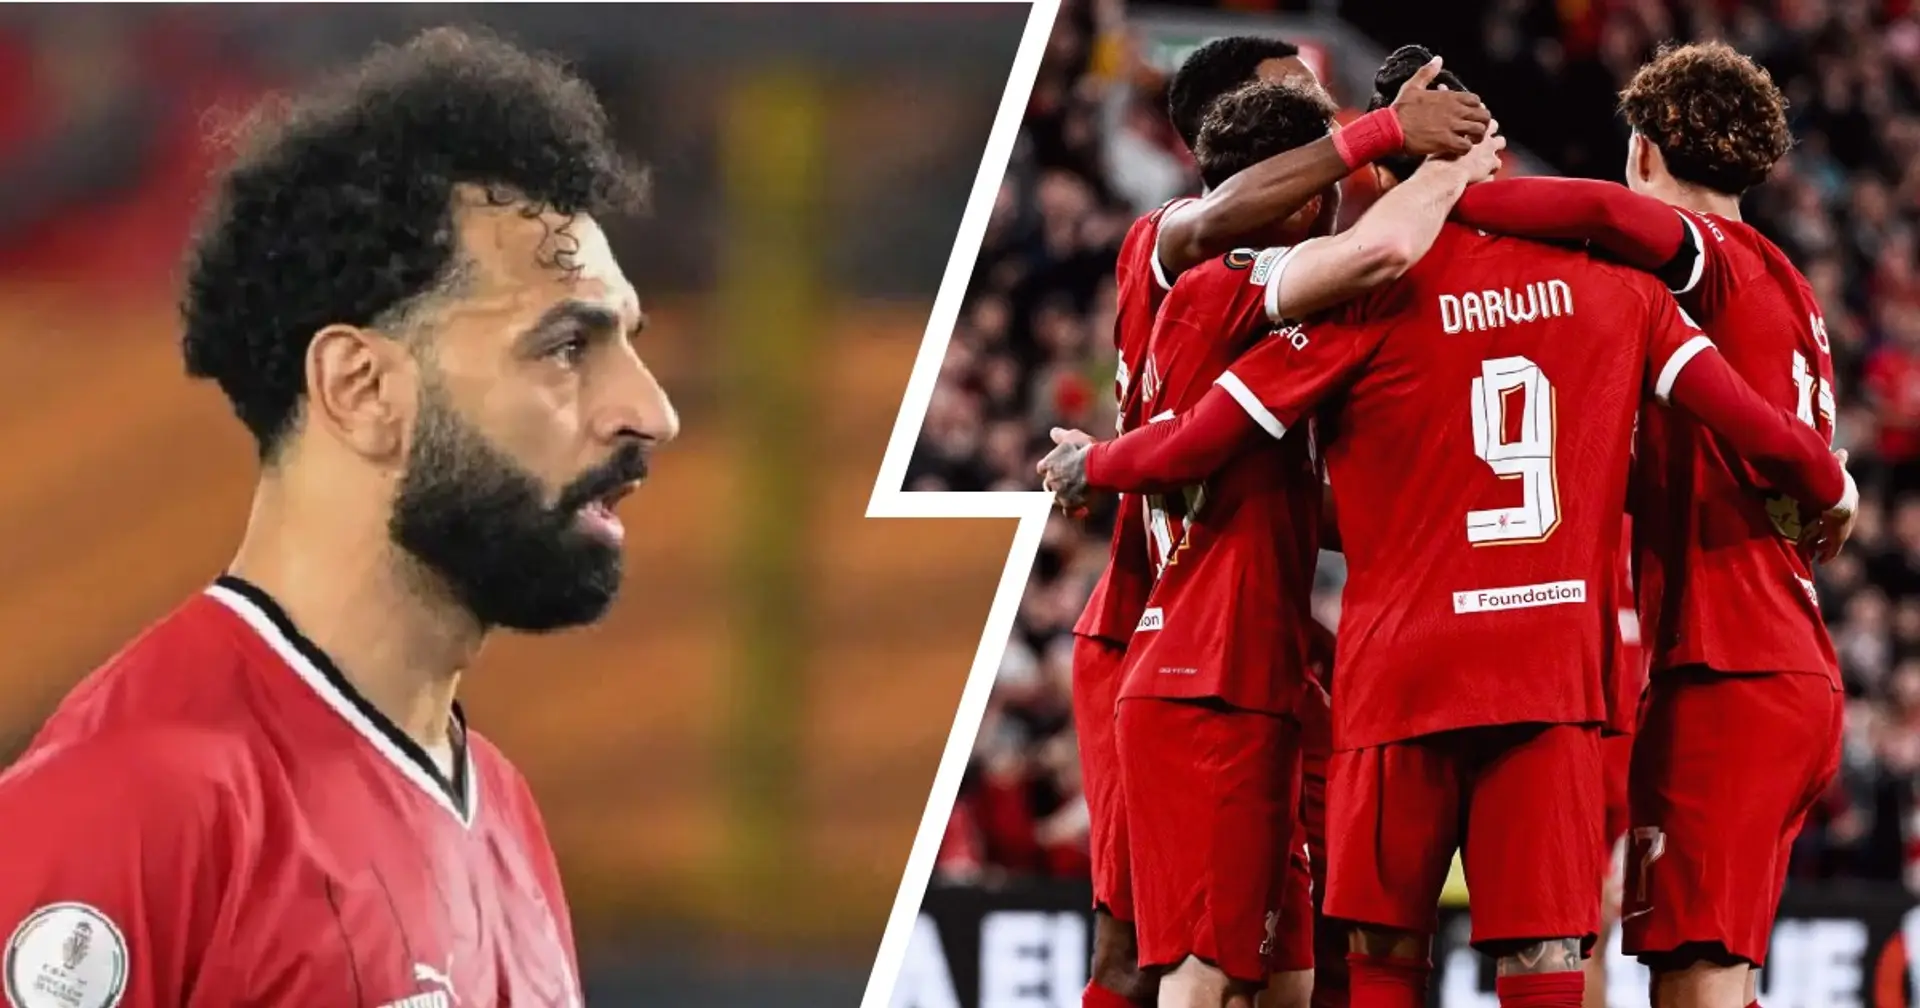 Forget Salah: Liverpool's most dangerous player named - he has 7 goals & 2 assists v Arsenal